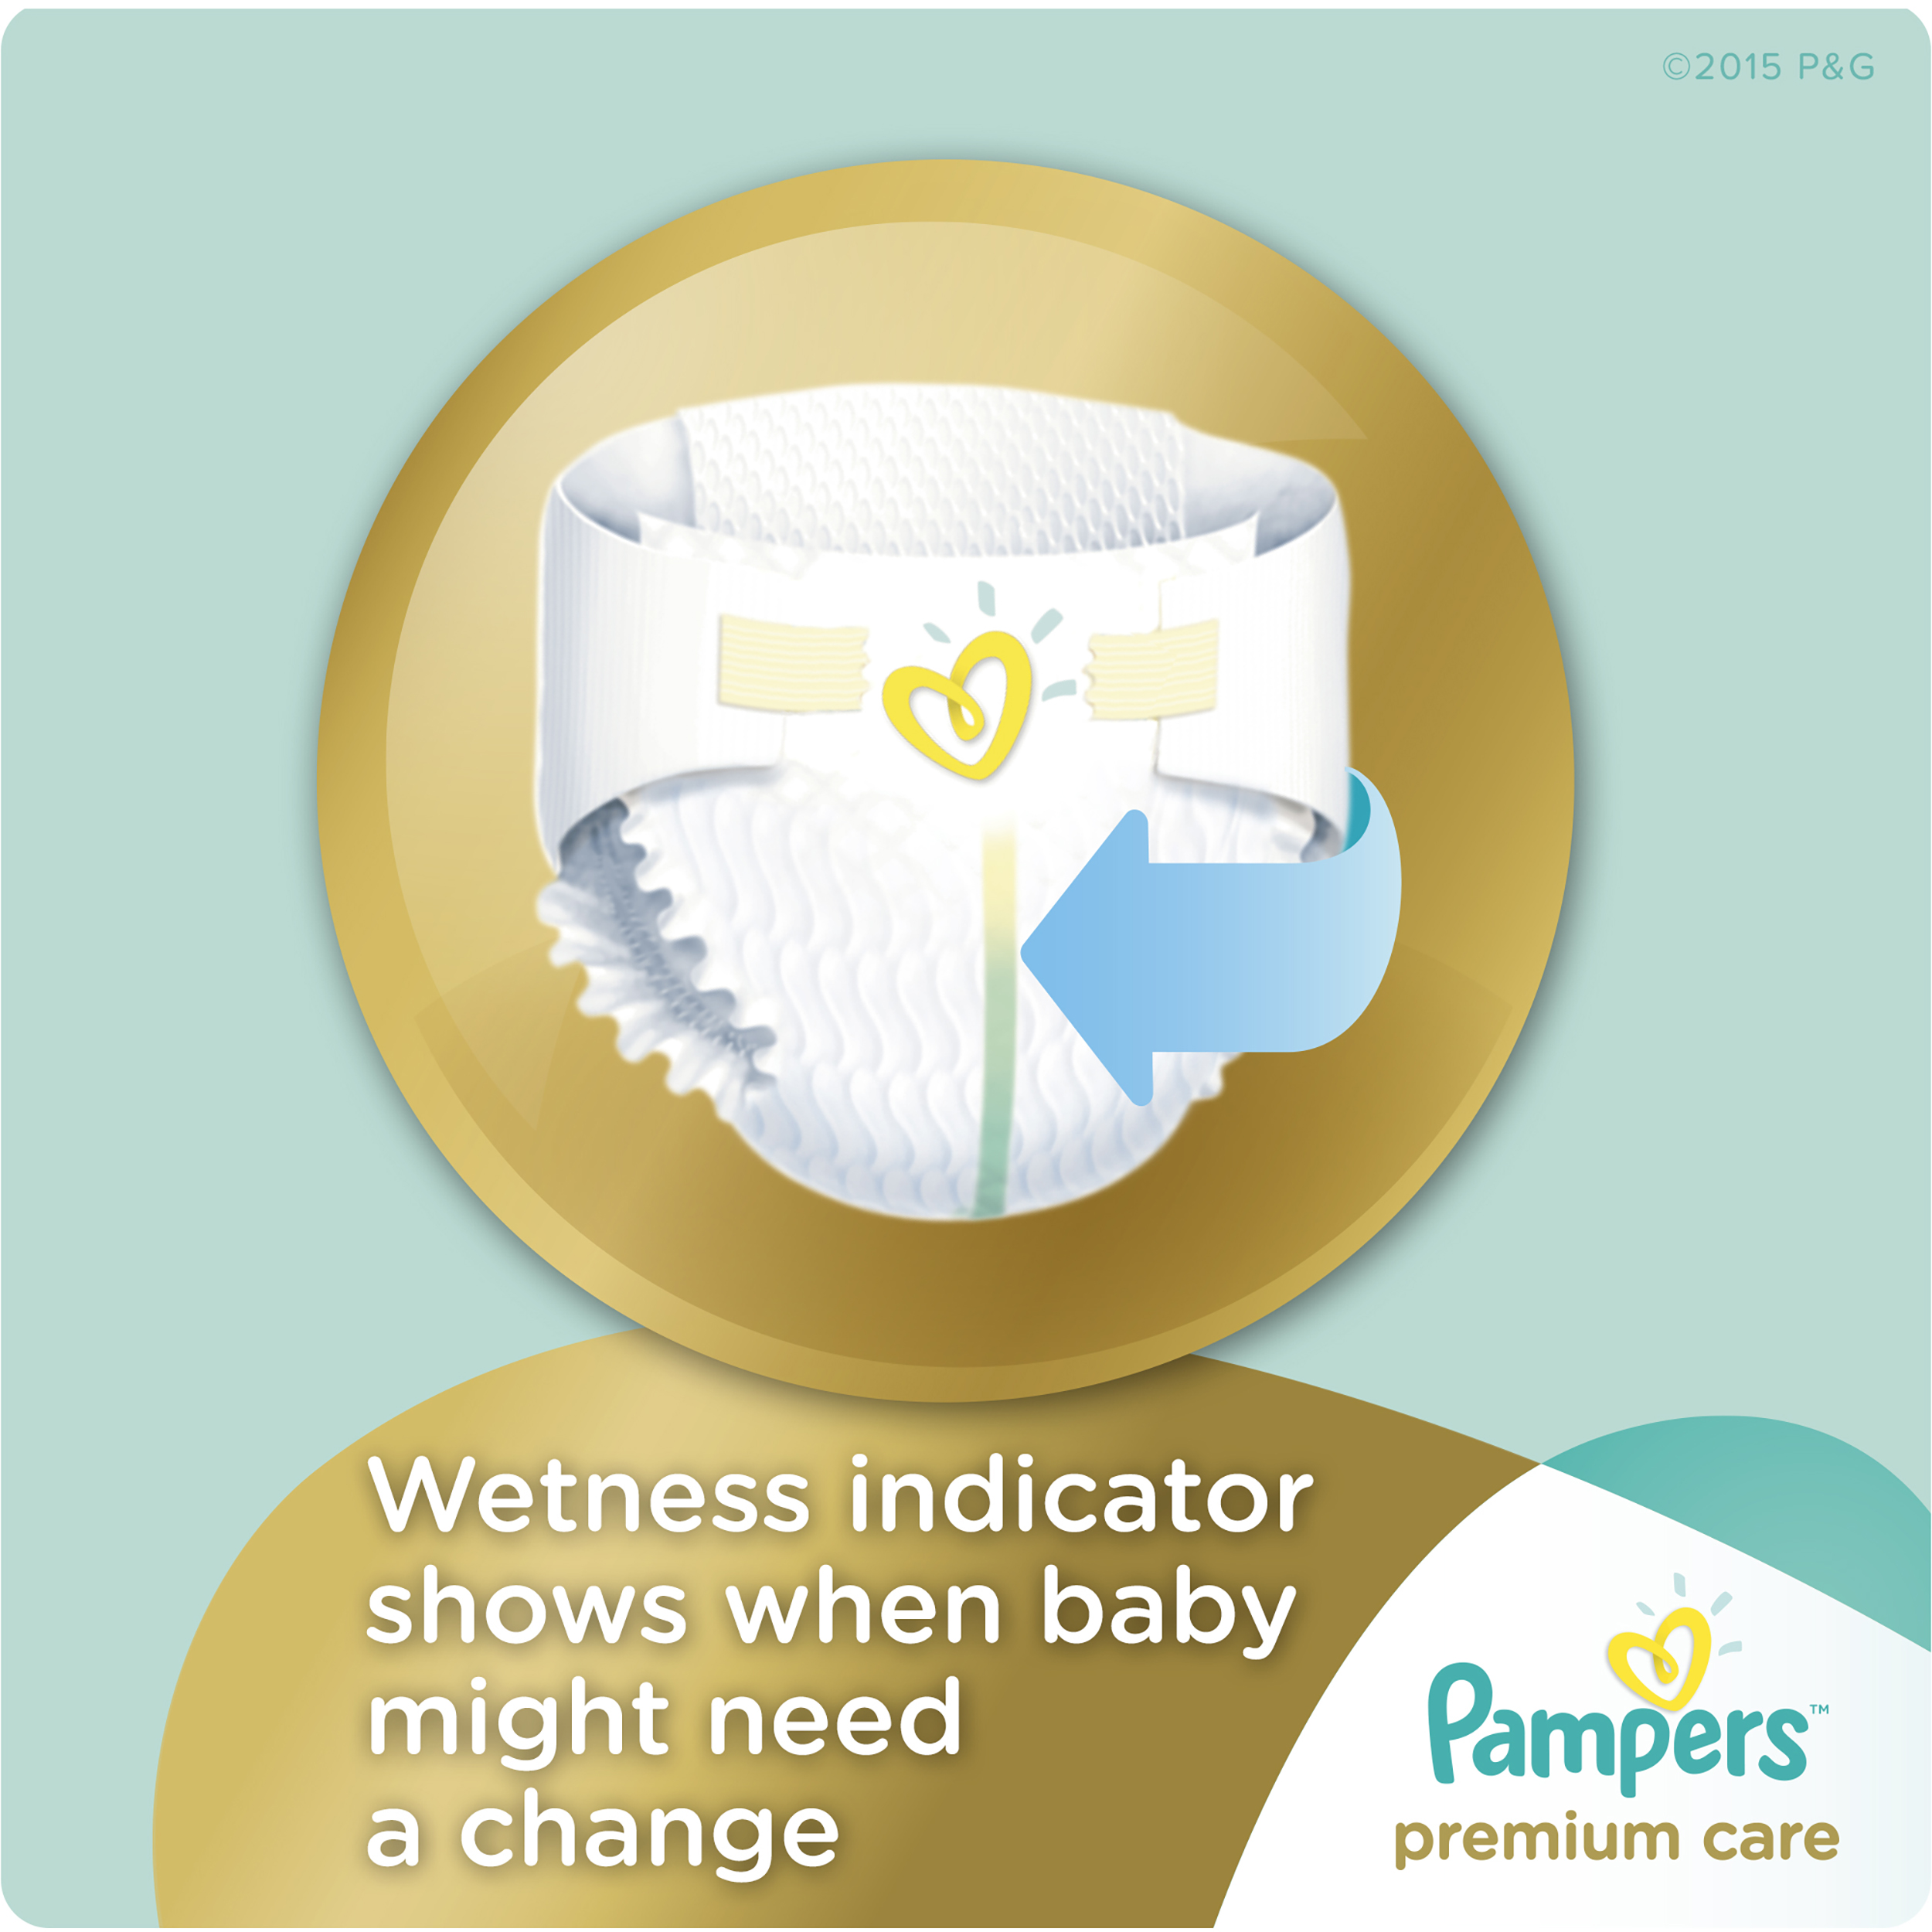 Pampers Premium Care Diapers (Choose Size and Count) - image 5 of 11